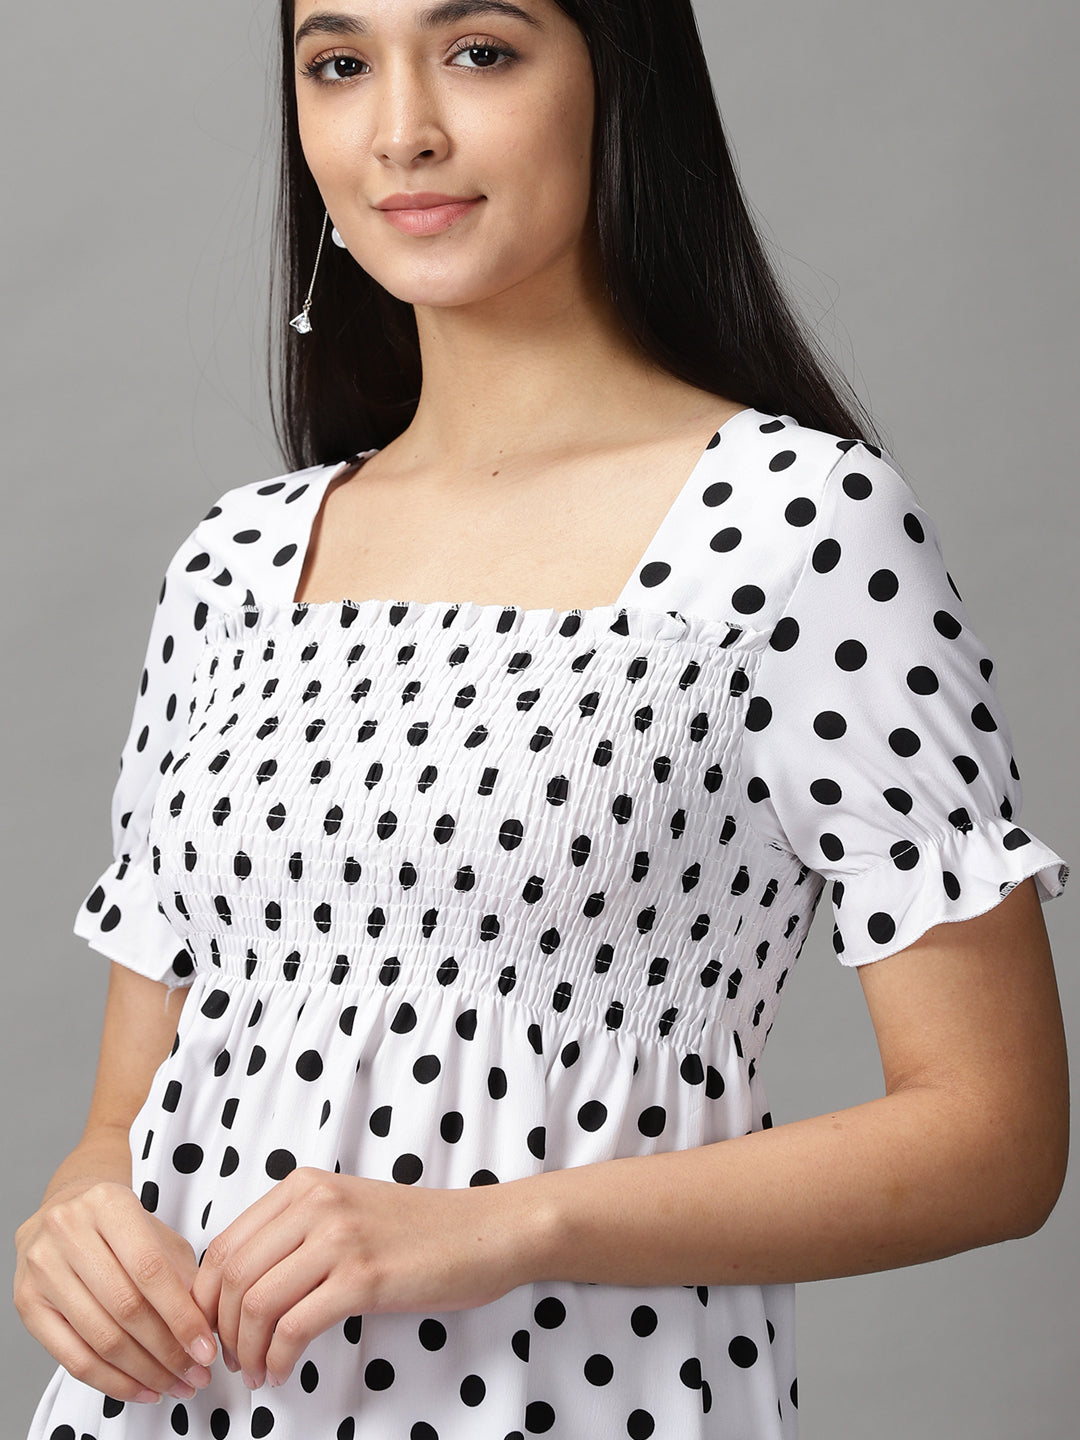 Women's White Polka Dots Fit and Flare Dress